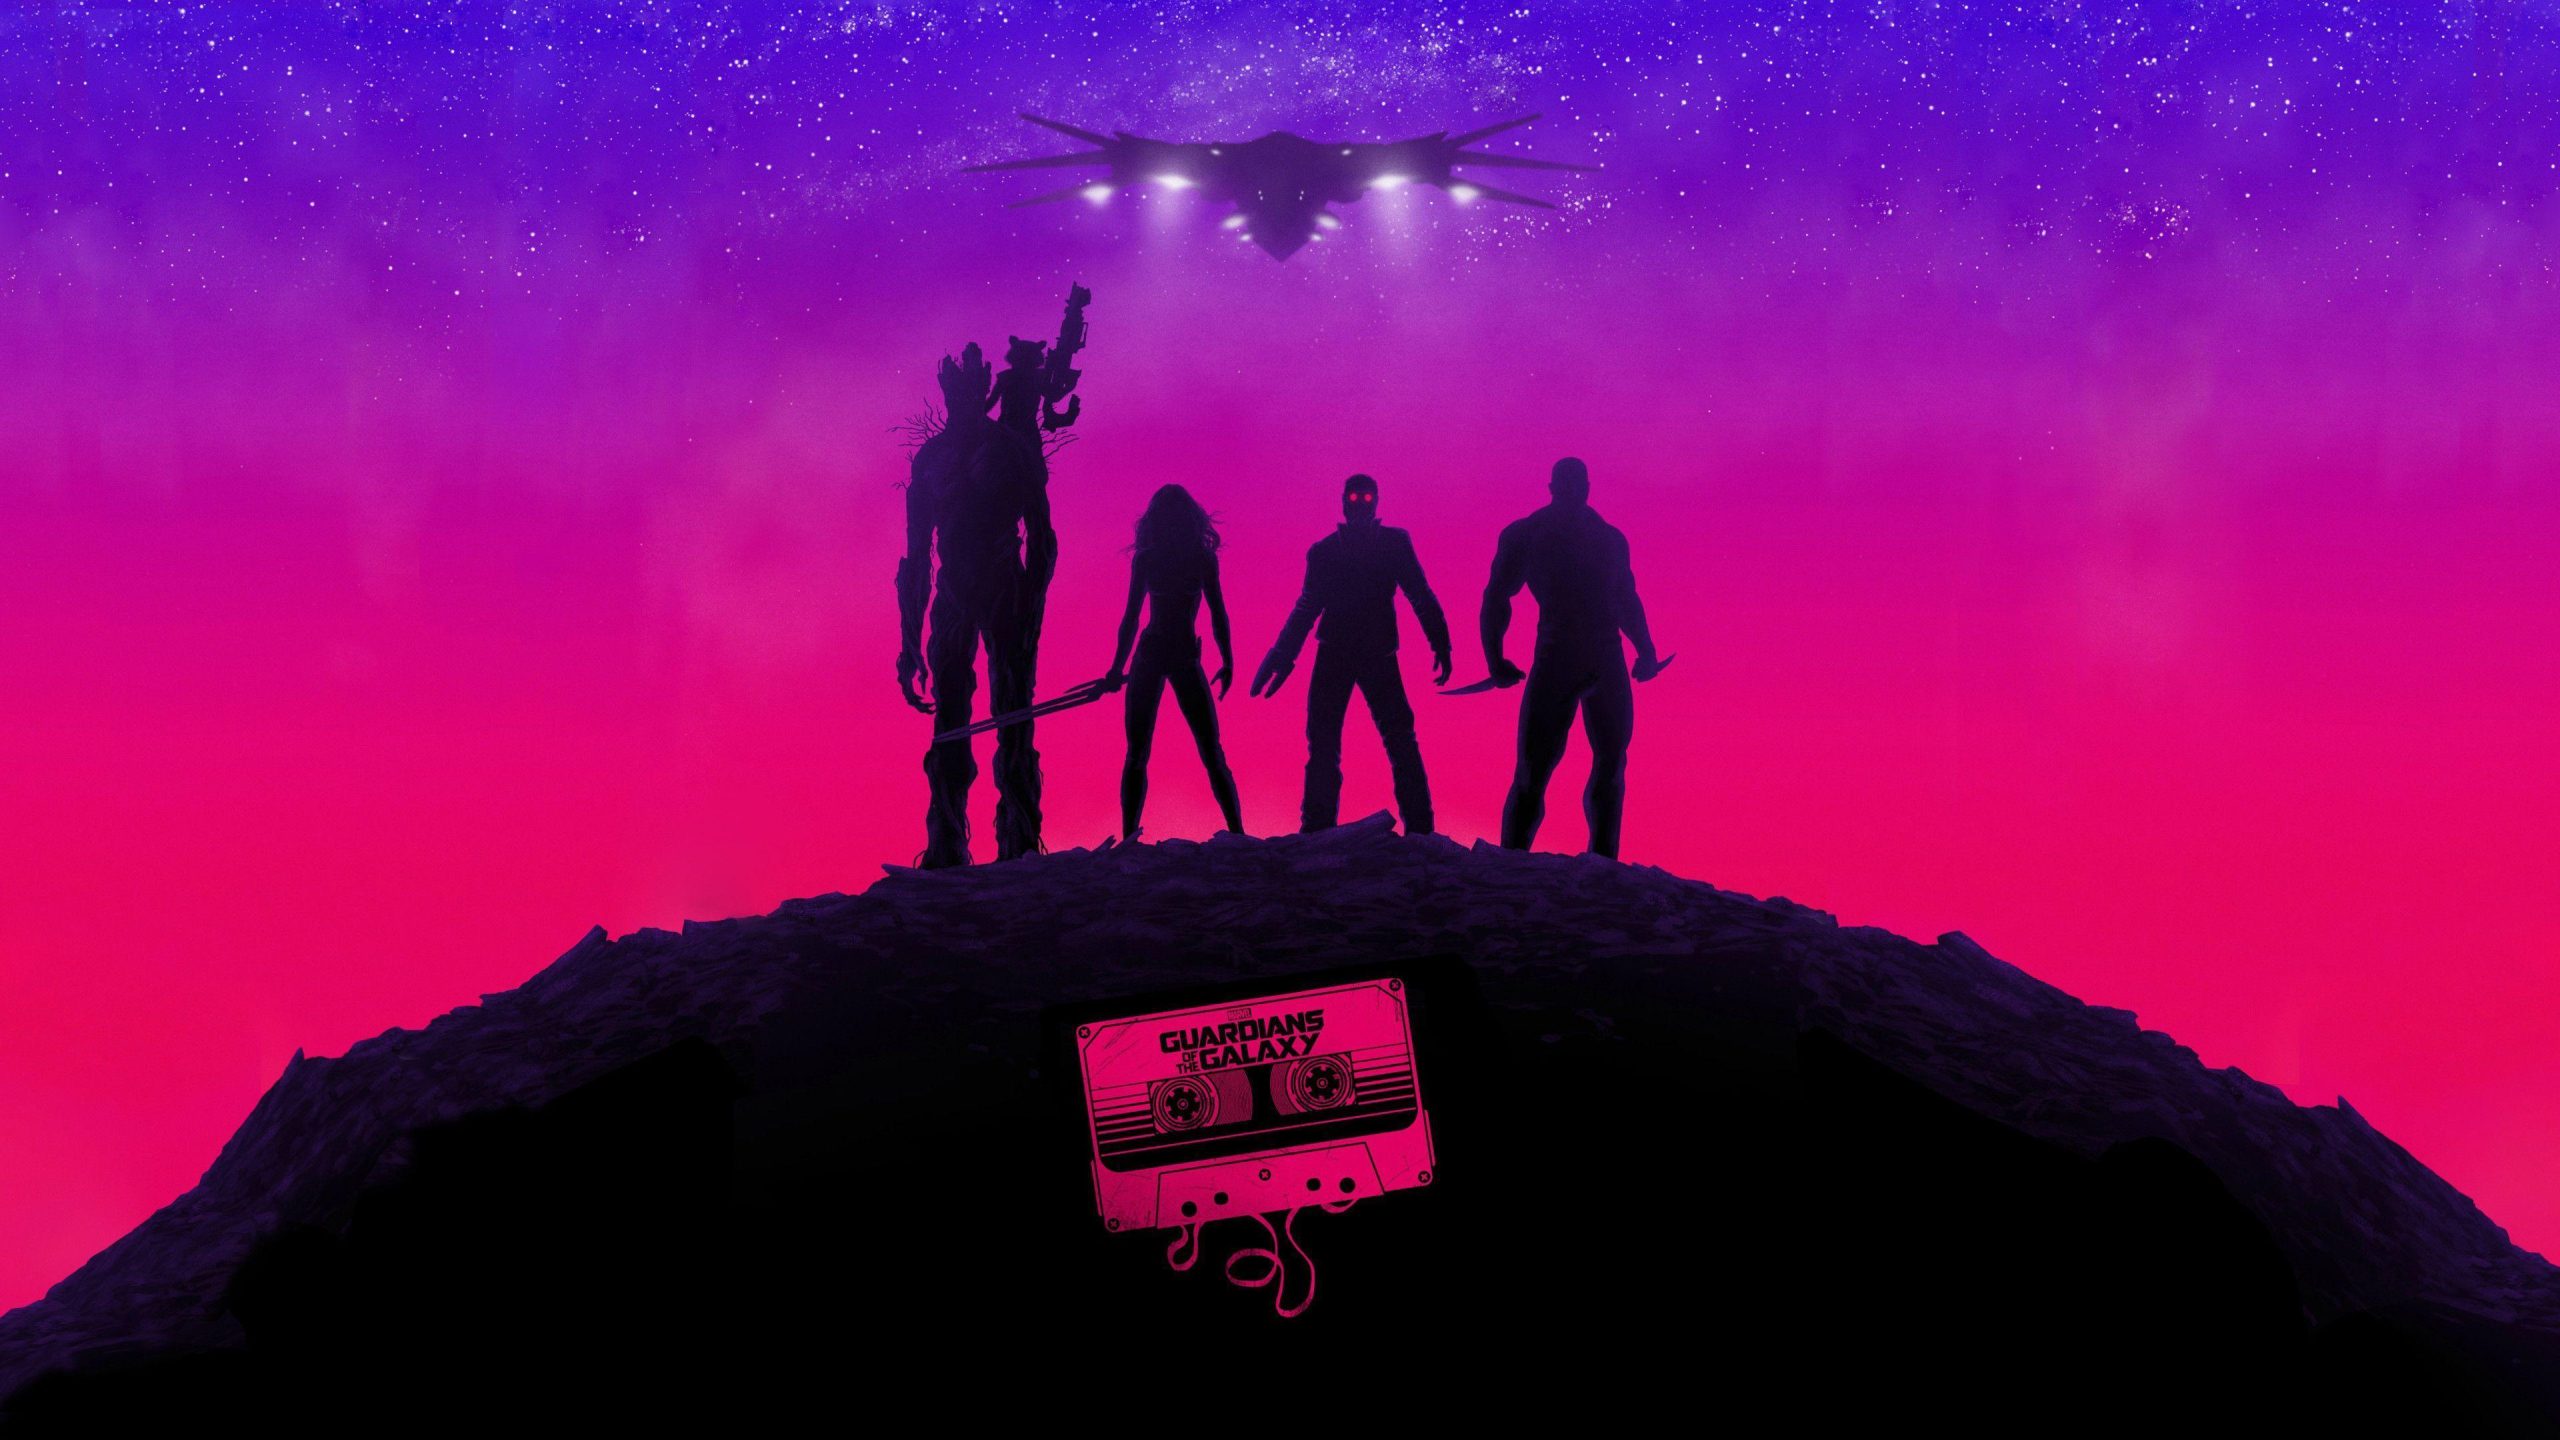 Guardians Of The Galaxy 2 Wallpaper For Ipad